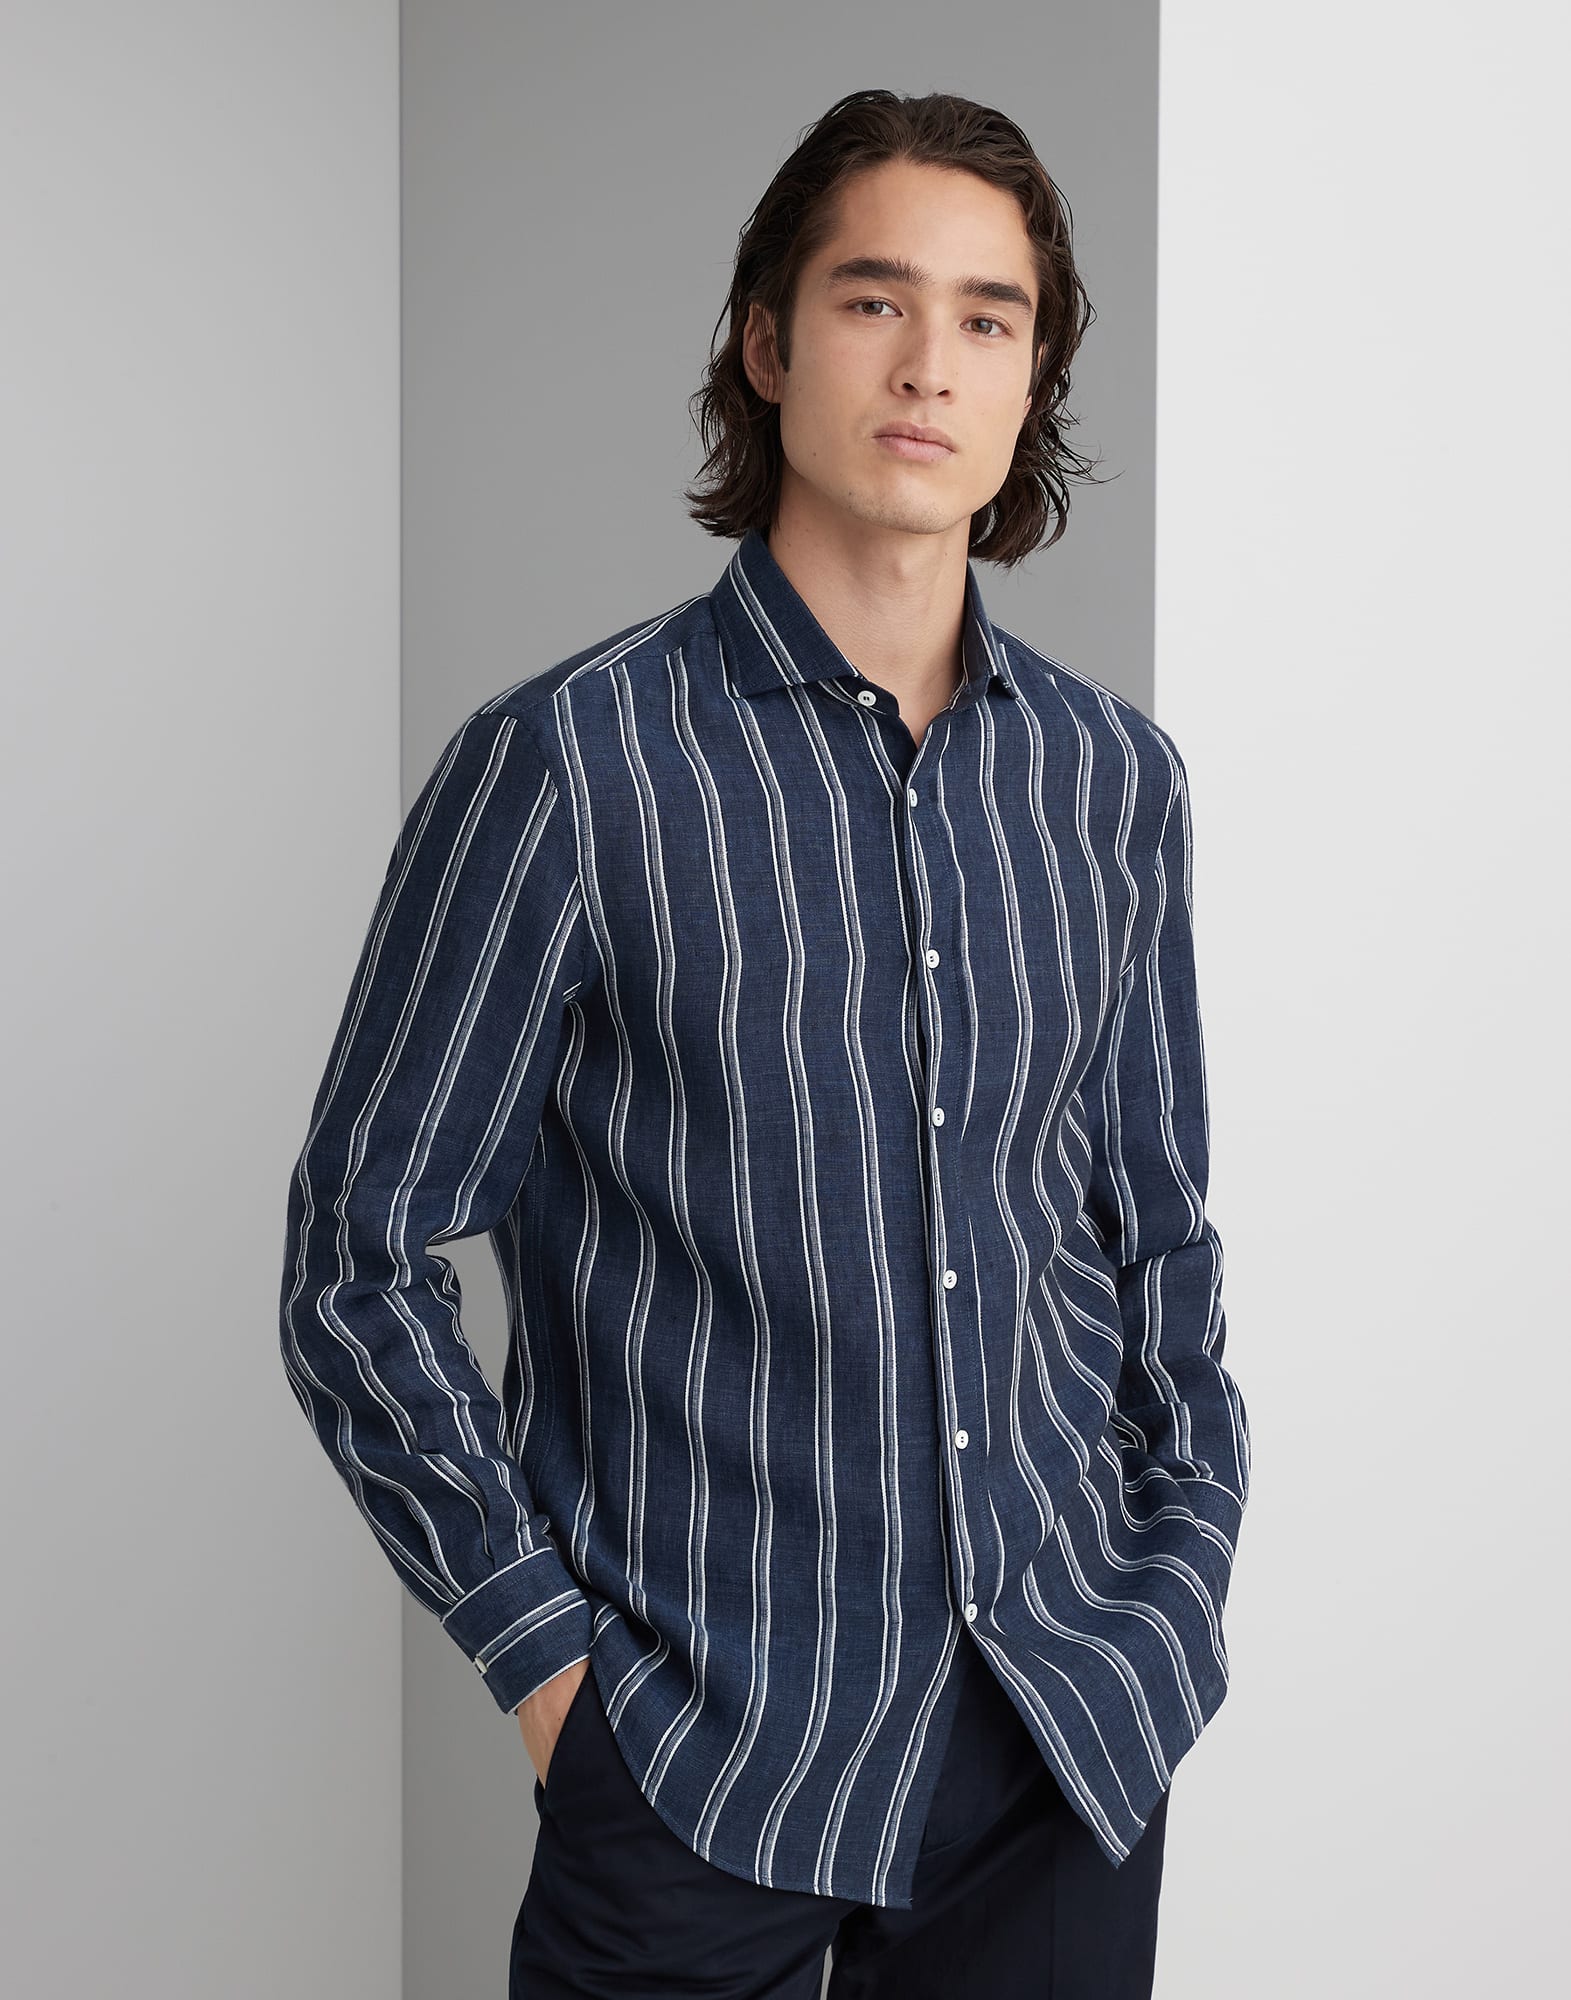 Easy fit shirt